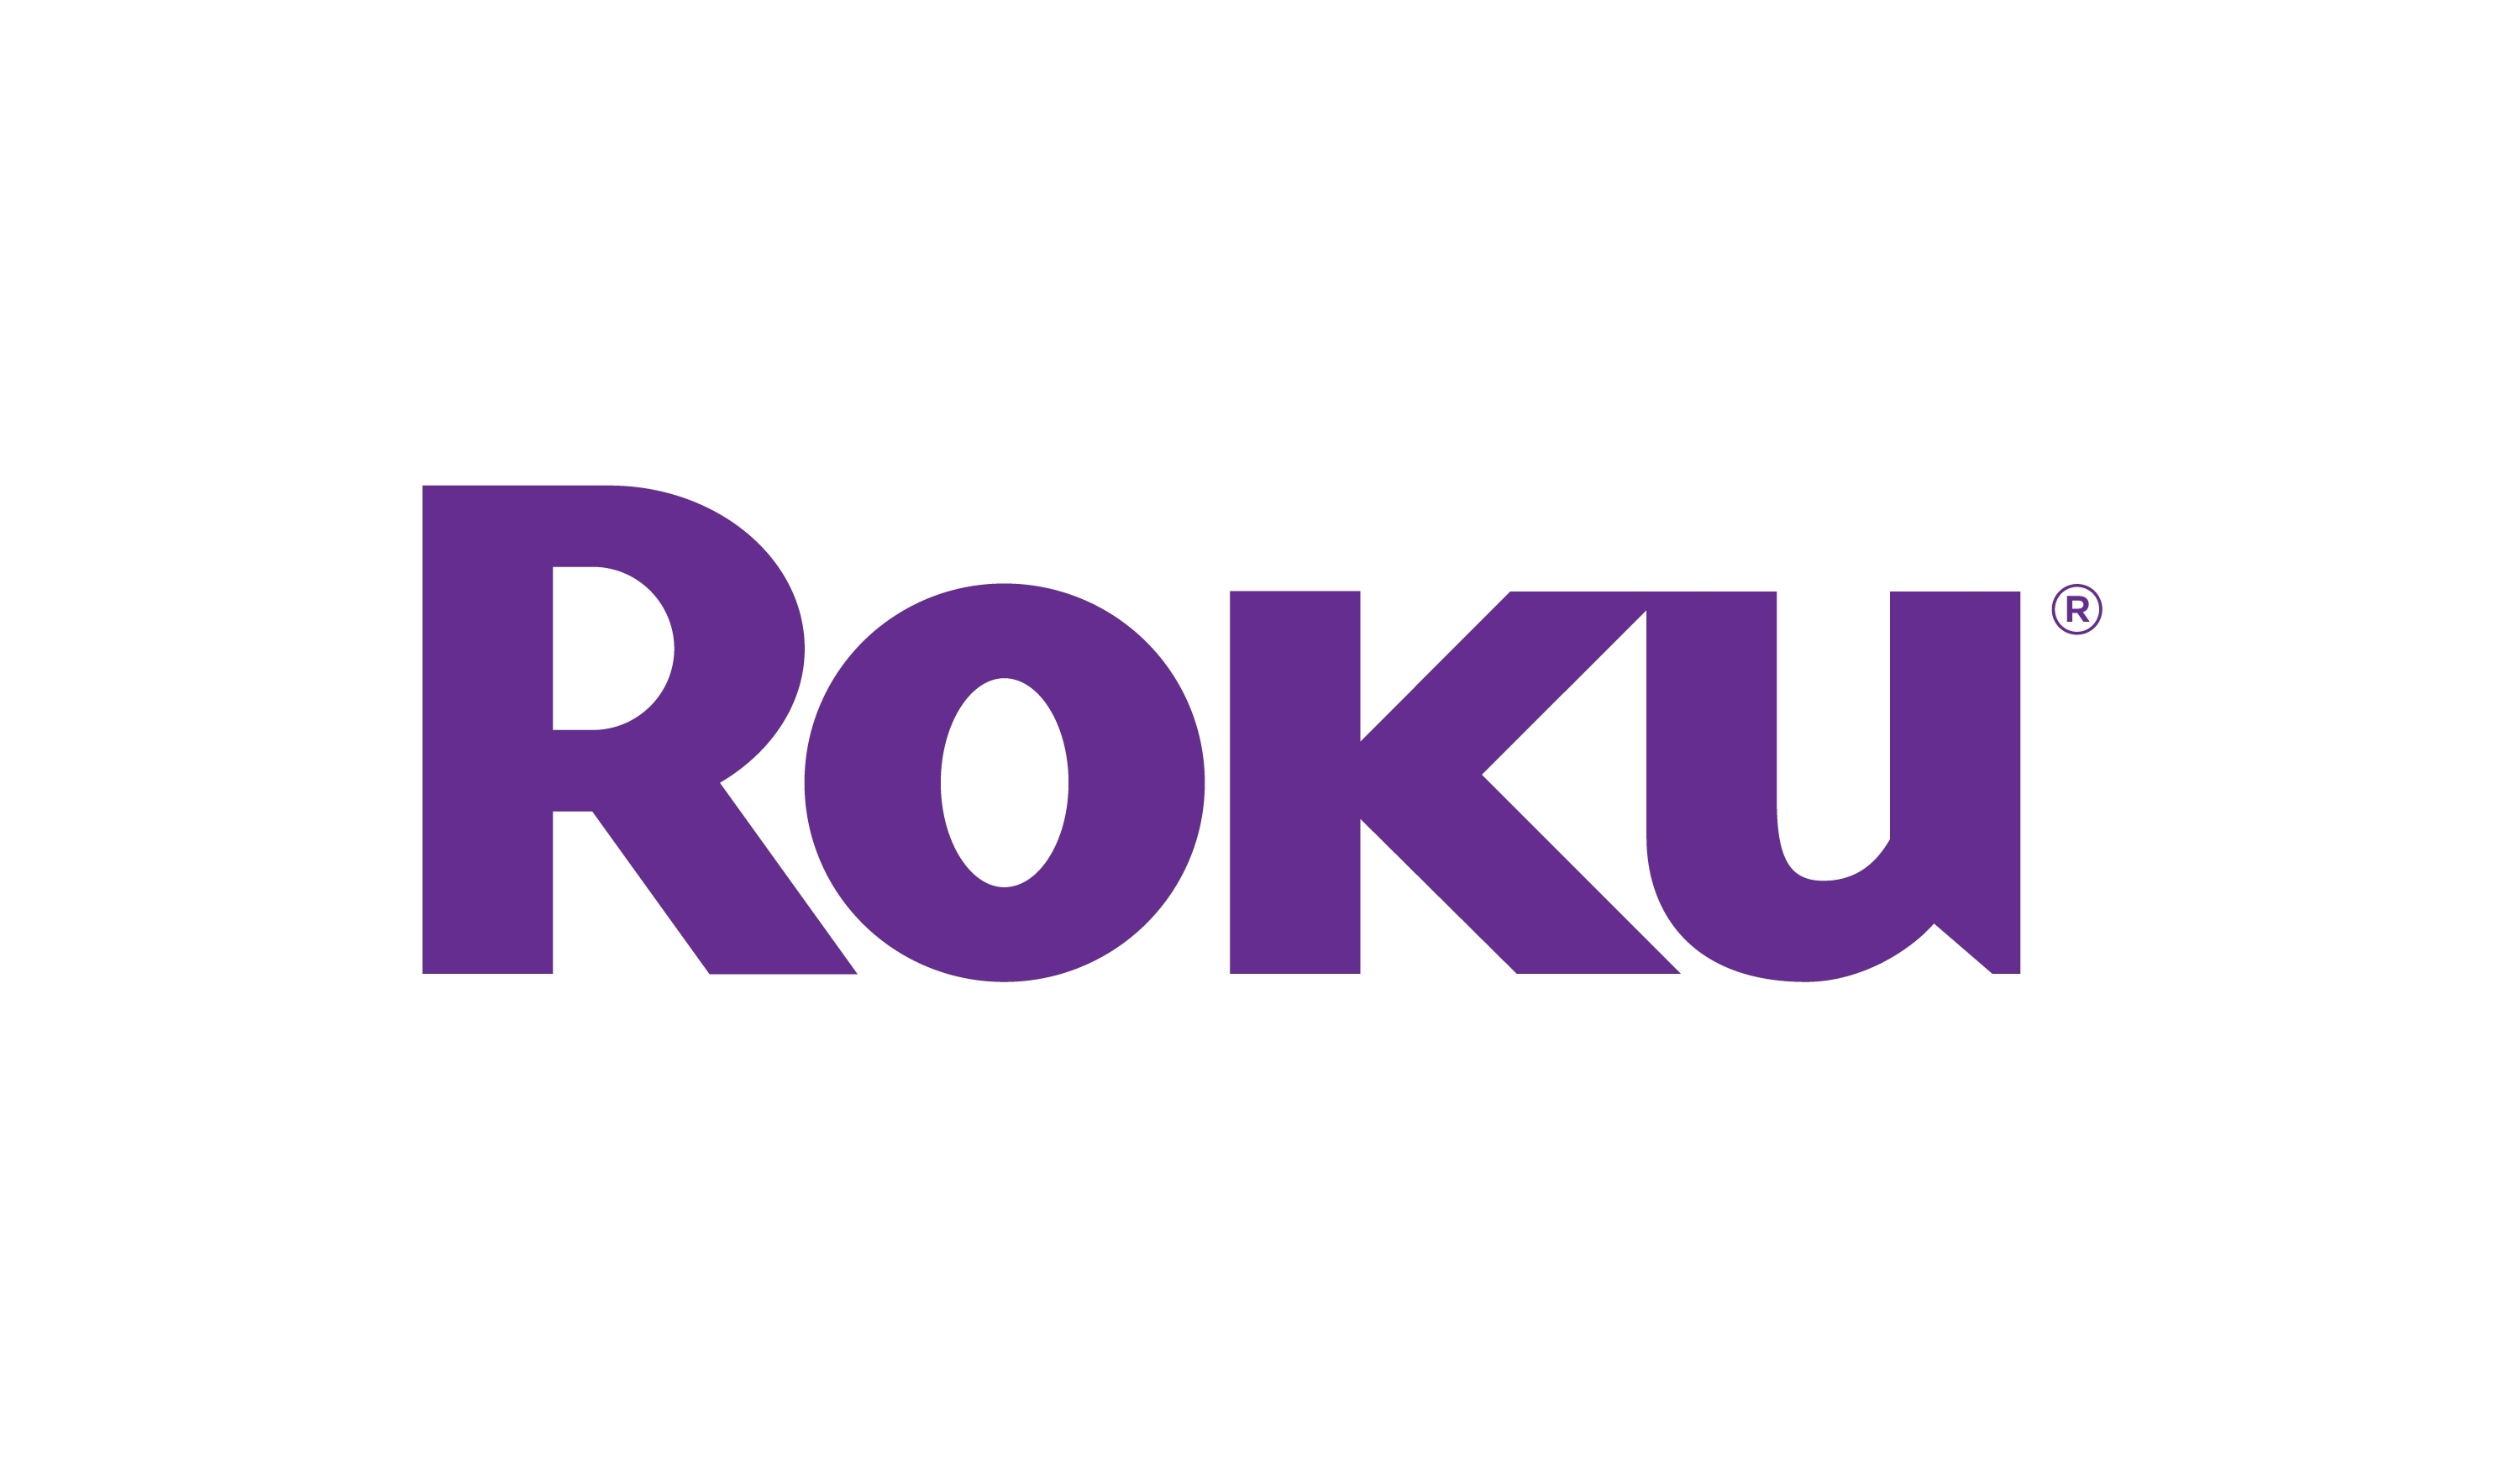 Introducing the Roku Ultra and Roku Voice Remote Pro bundle